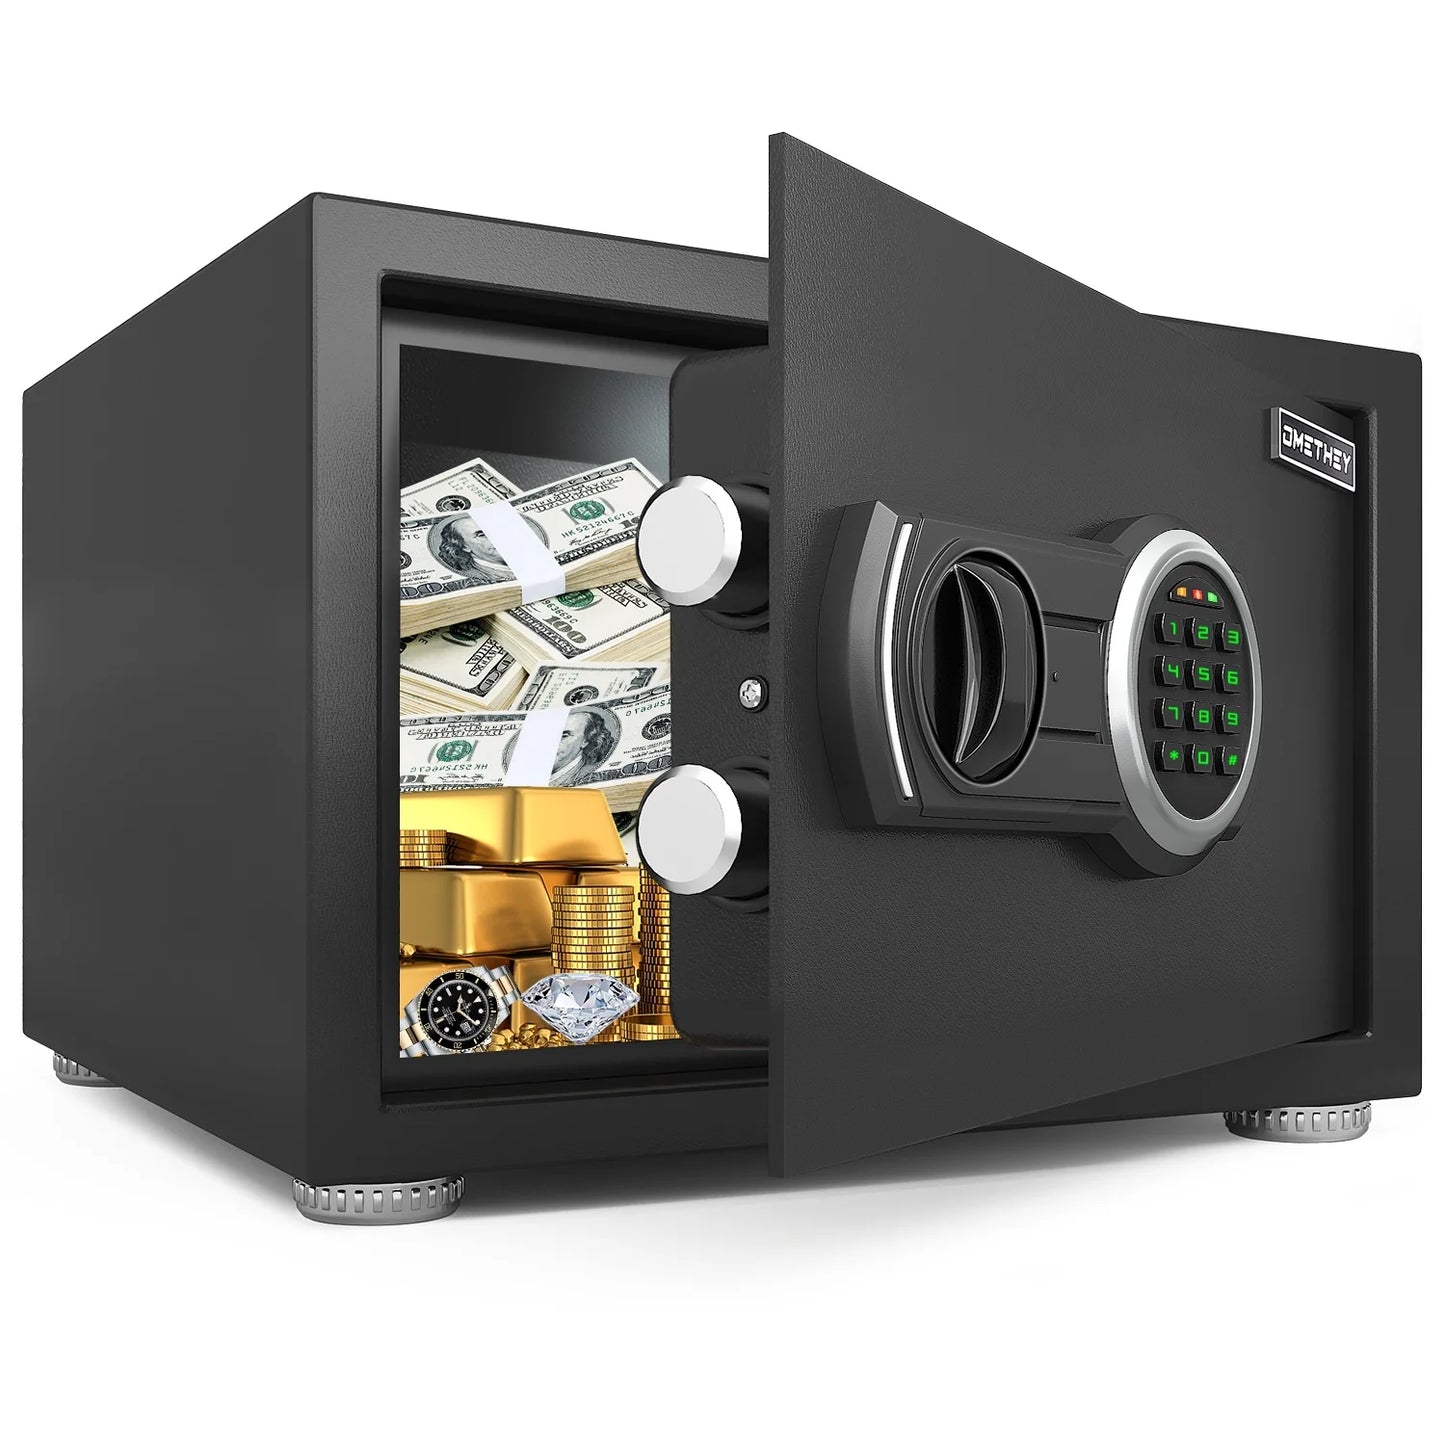 1KN-20 0.5 Cub Small Safe Box, Money Safe with Backlit Digital Keypad and Mute Function